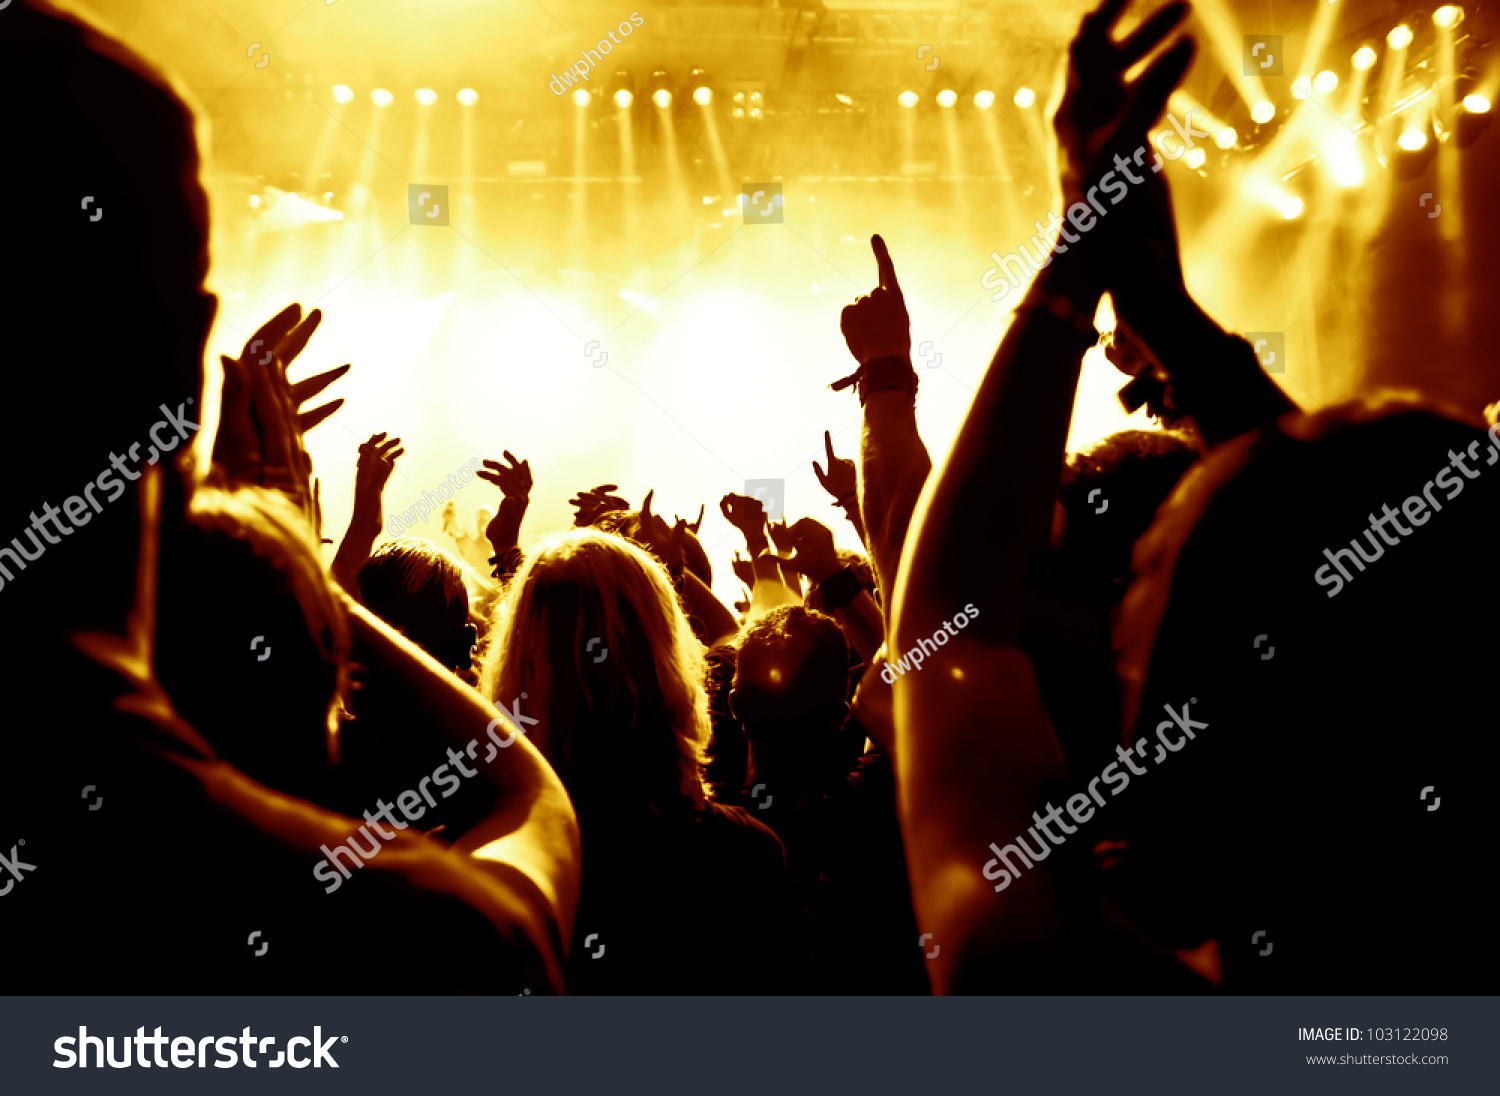 Cheering Crowd At Concert Stock Photo 103122098 : Shutterstock